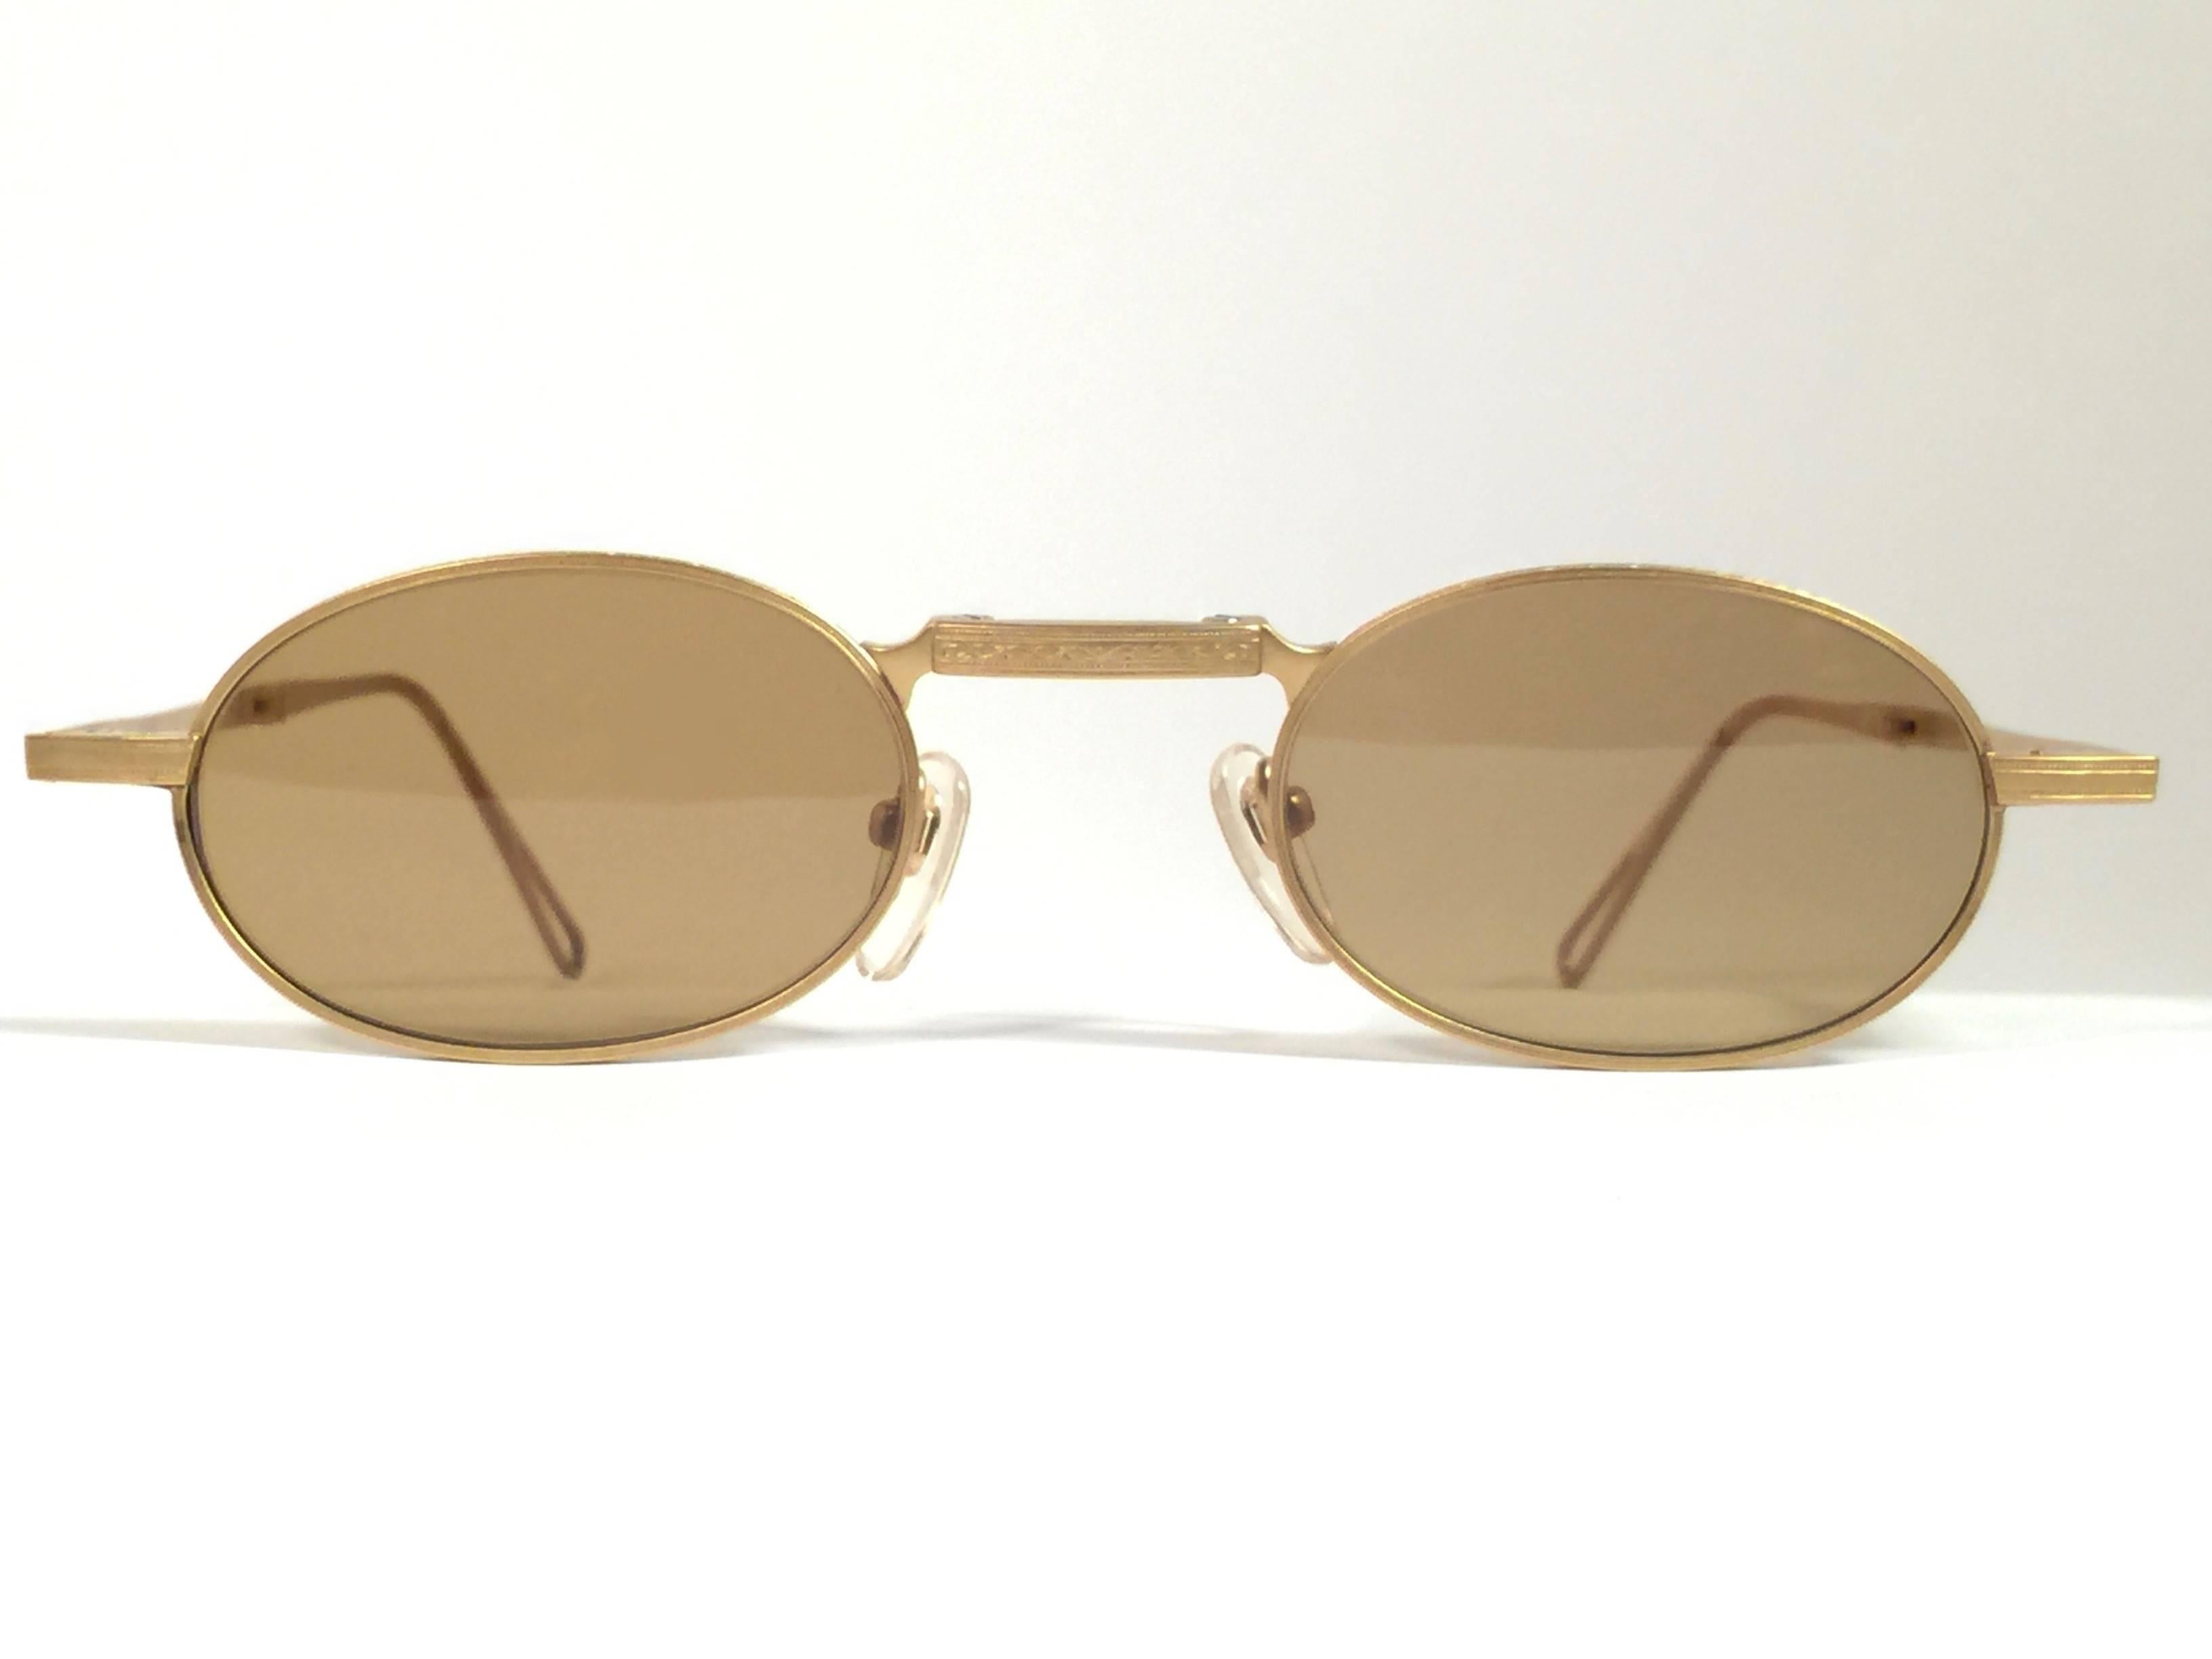 Cult brand Matsuda signed this ultra chic pair of oval folding gold matte sunglasses. 

Spotless medium brown lenses.

Superior quality and design. 

New, never worn or displayed. Made in japan. 
This item may show minor sign of wear due to